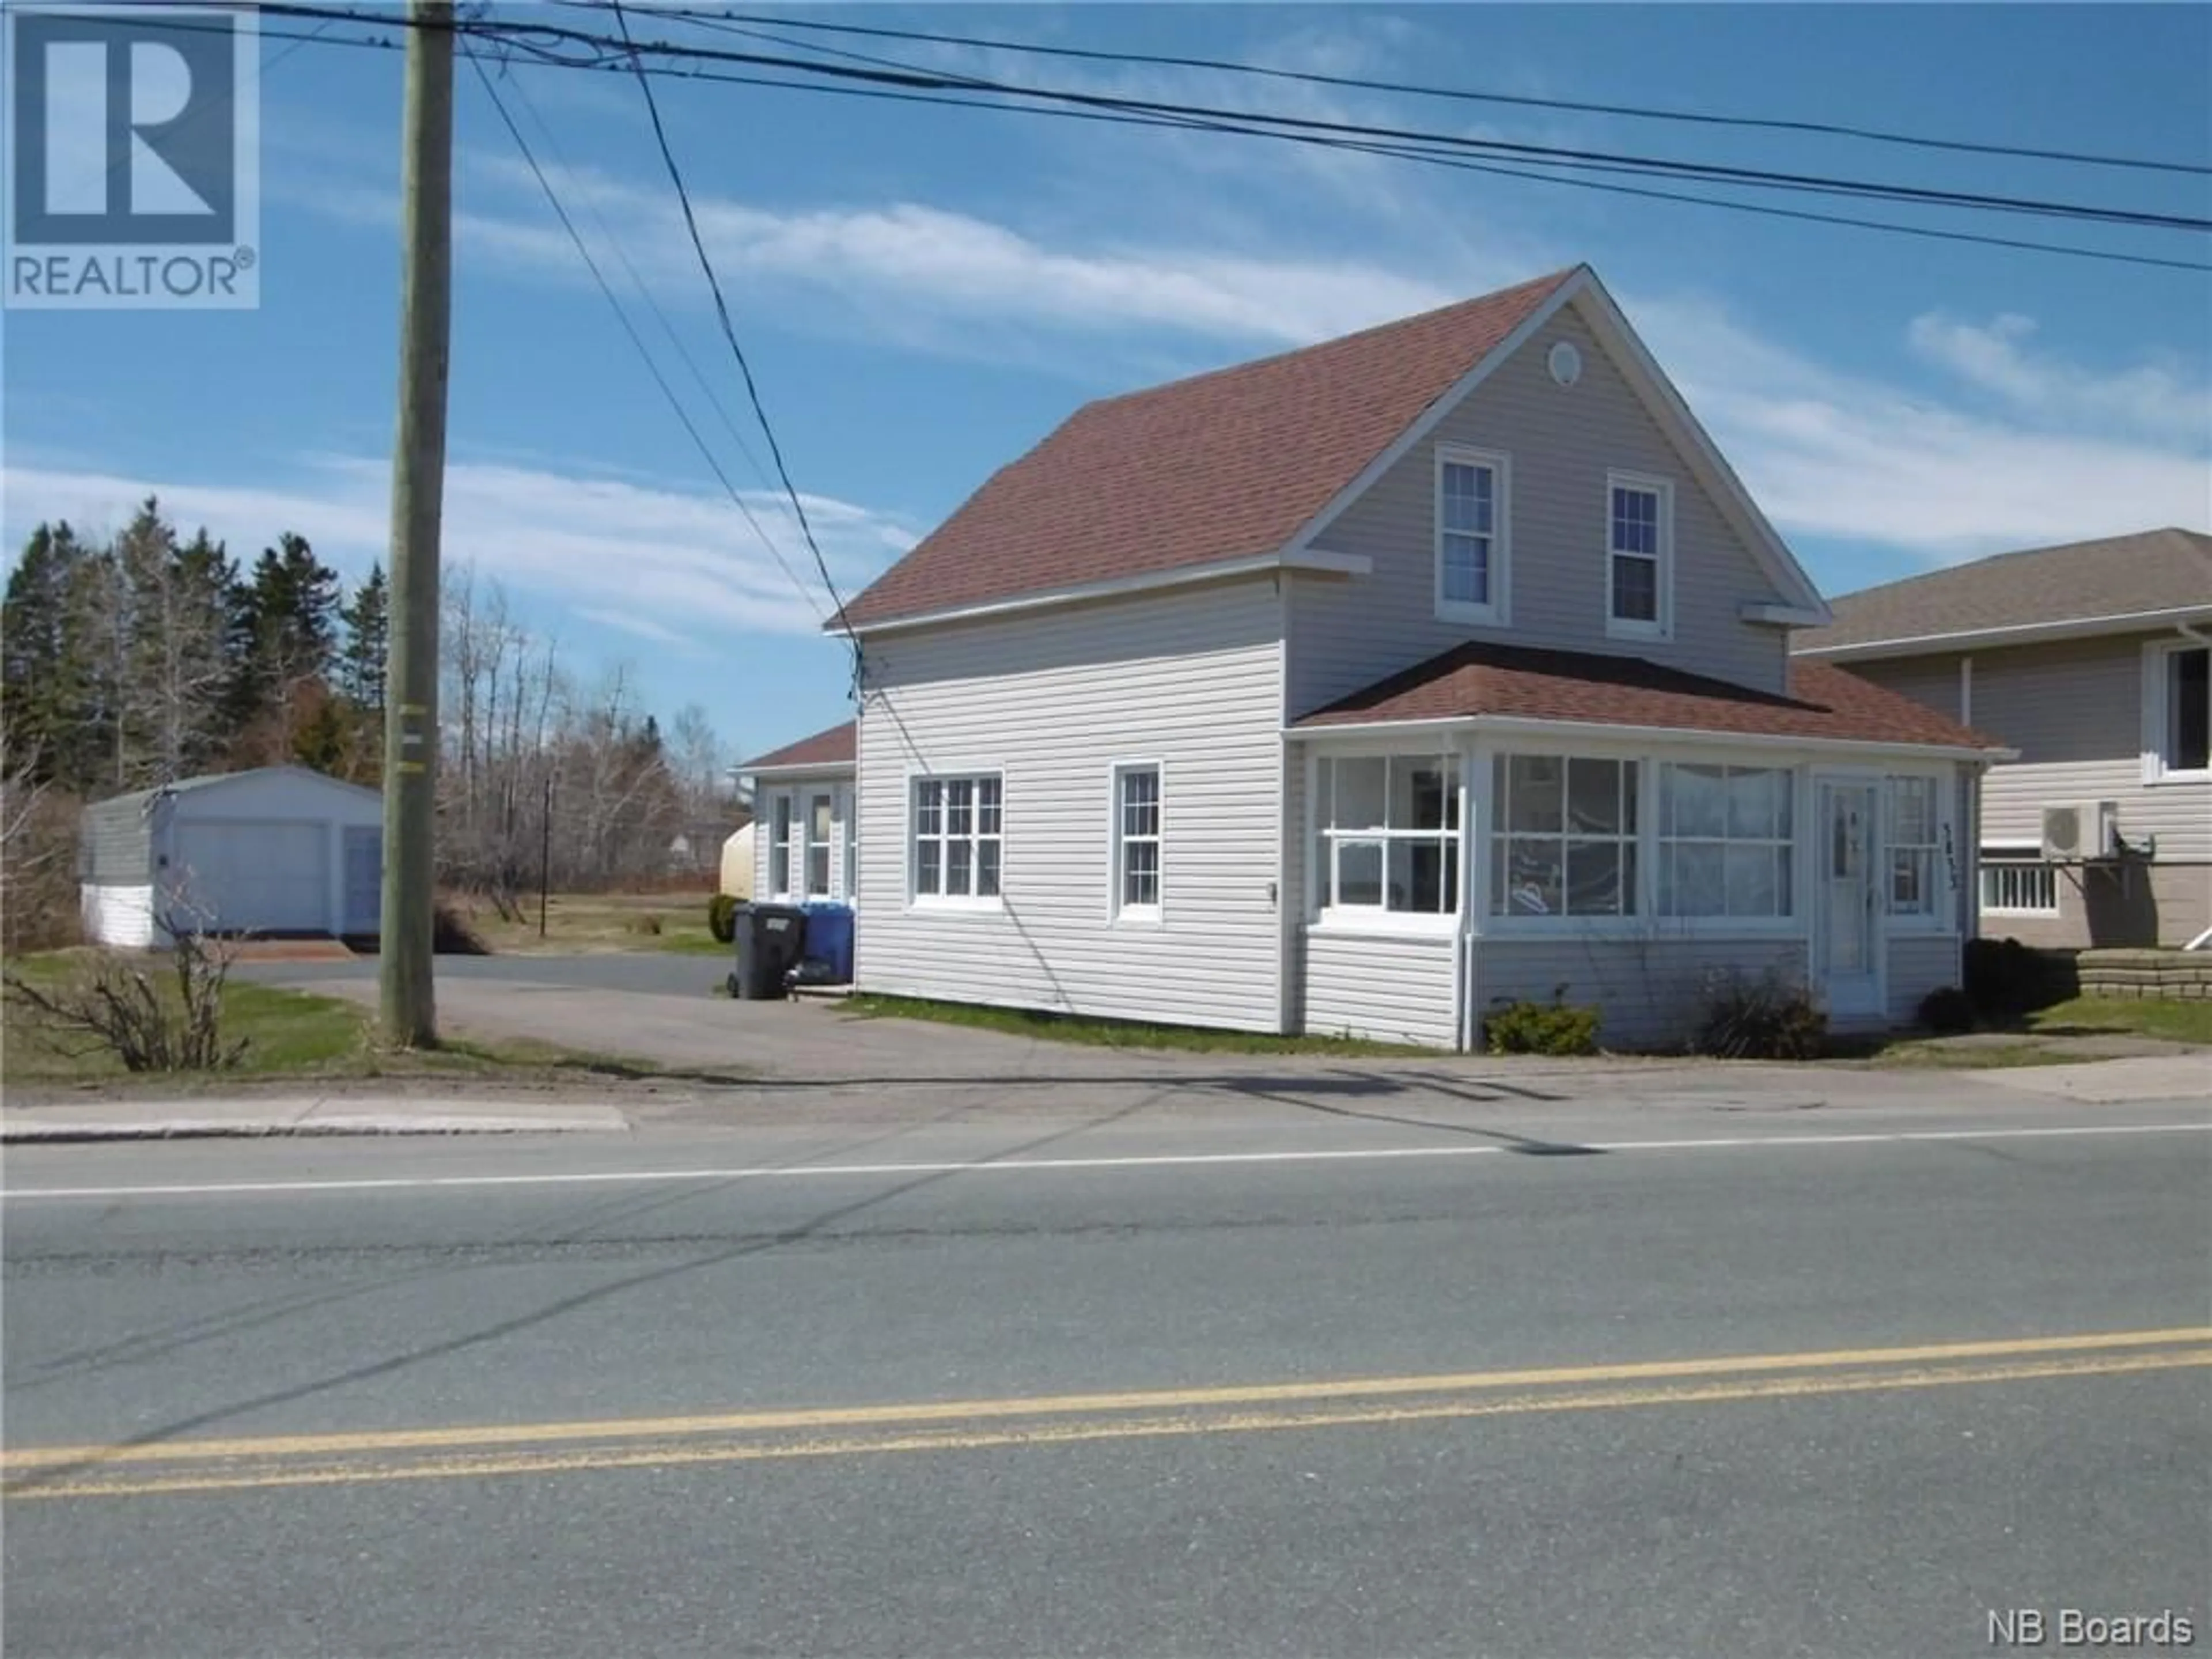 Home with unknown exterior material for 3833 rue Principale, Tracadie New Brunswick E1X1B6